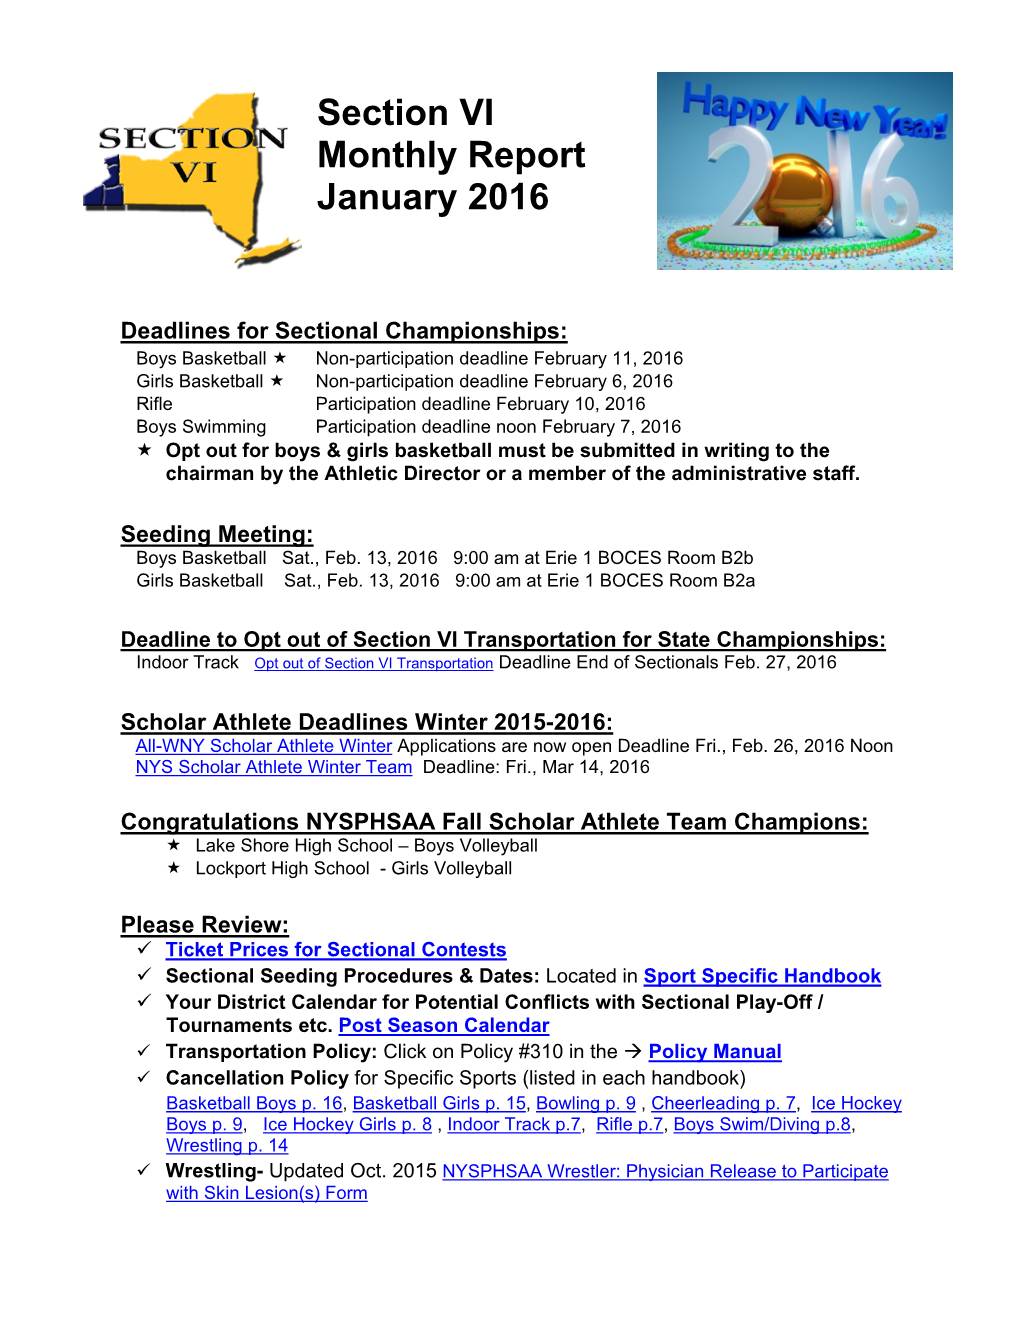 Section VI Monthly Report January 2016